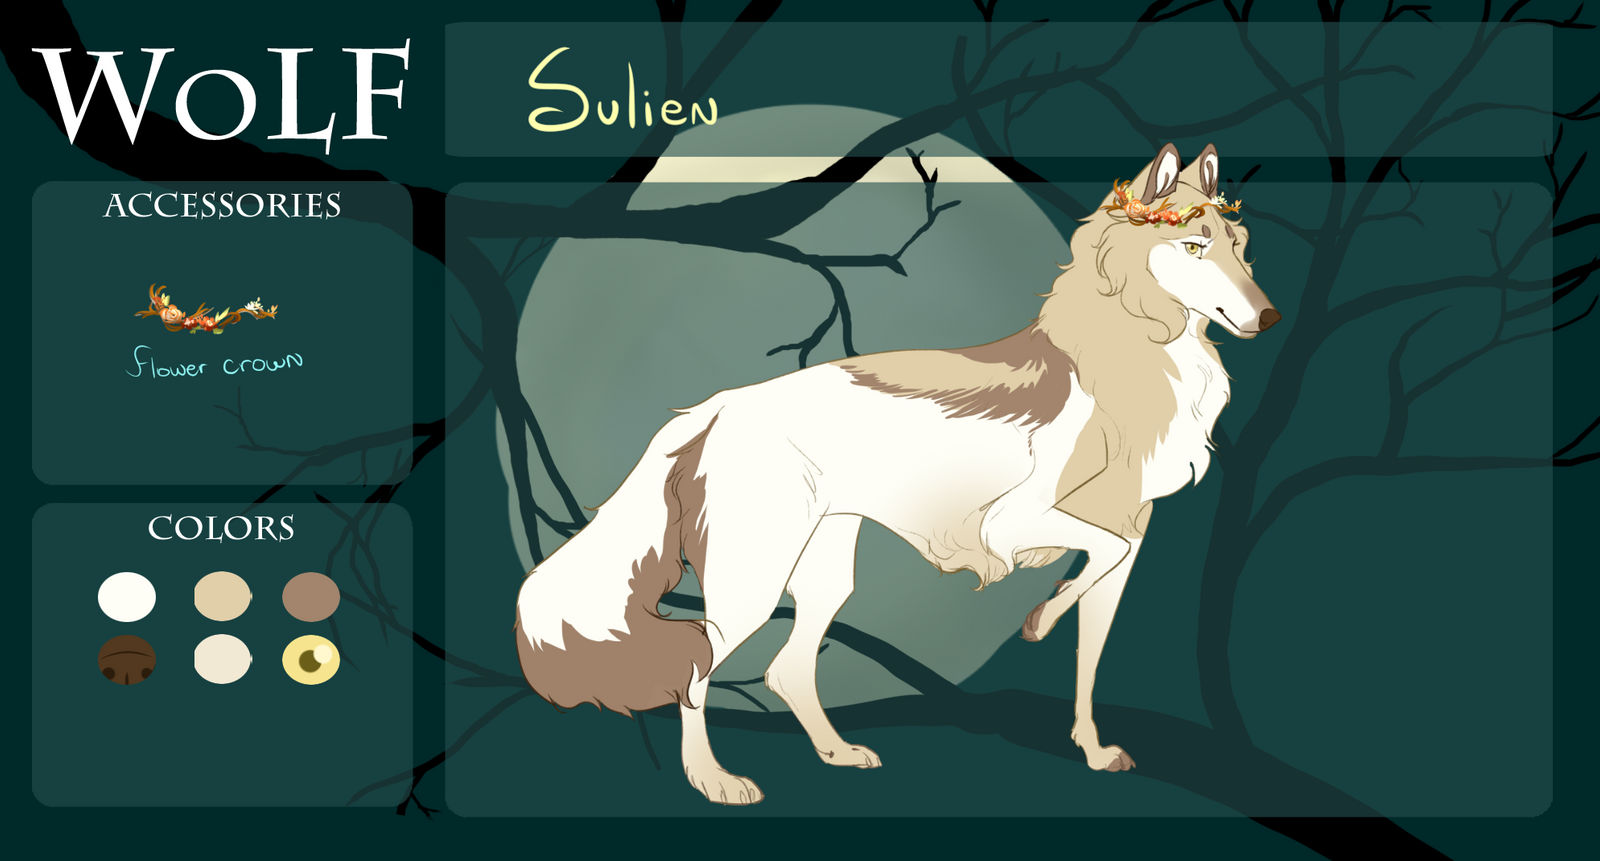 WoLF] Sulien, Onni